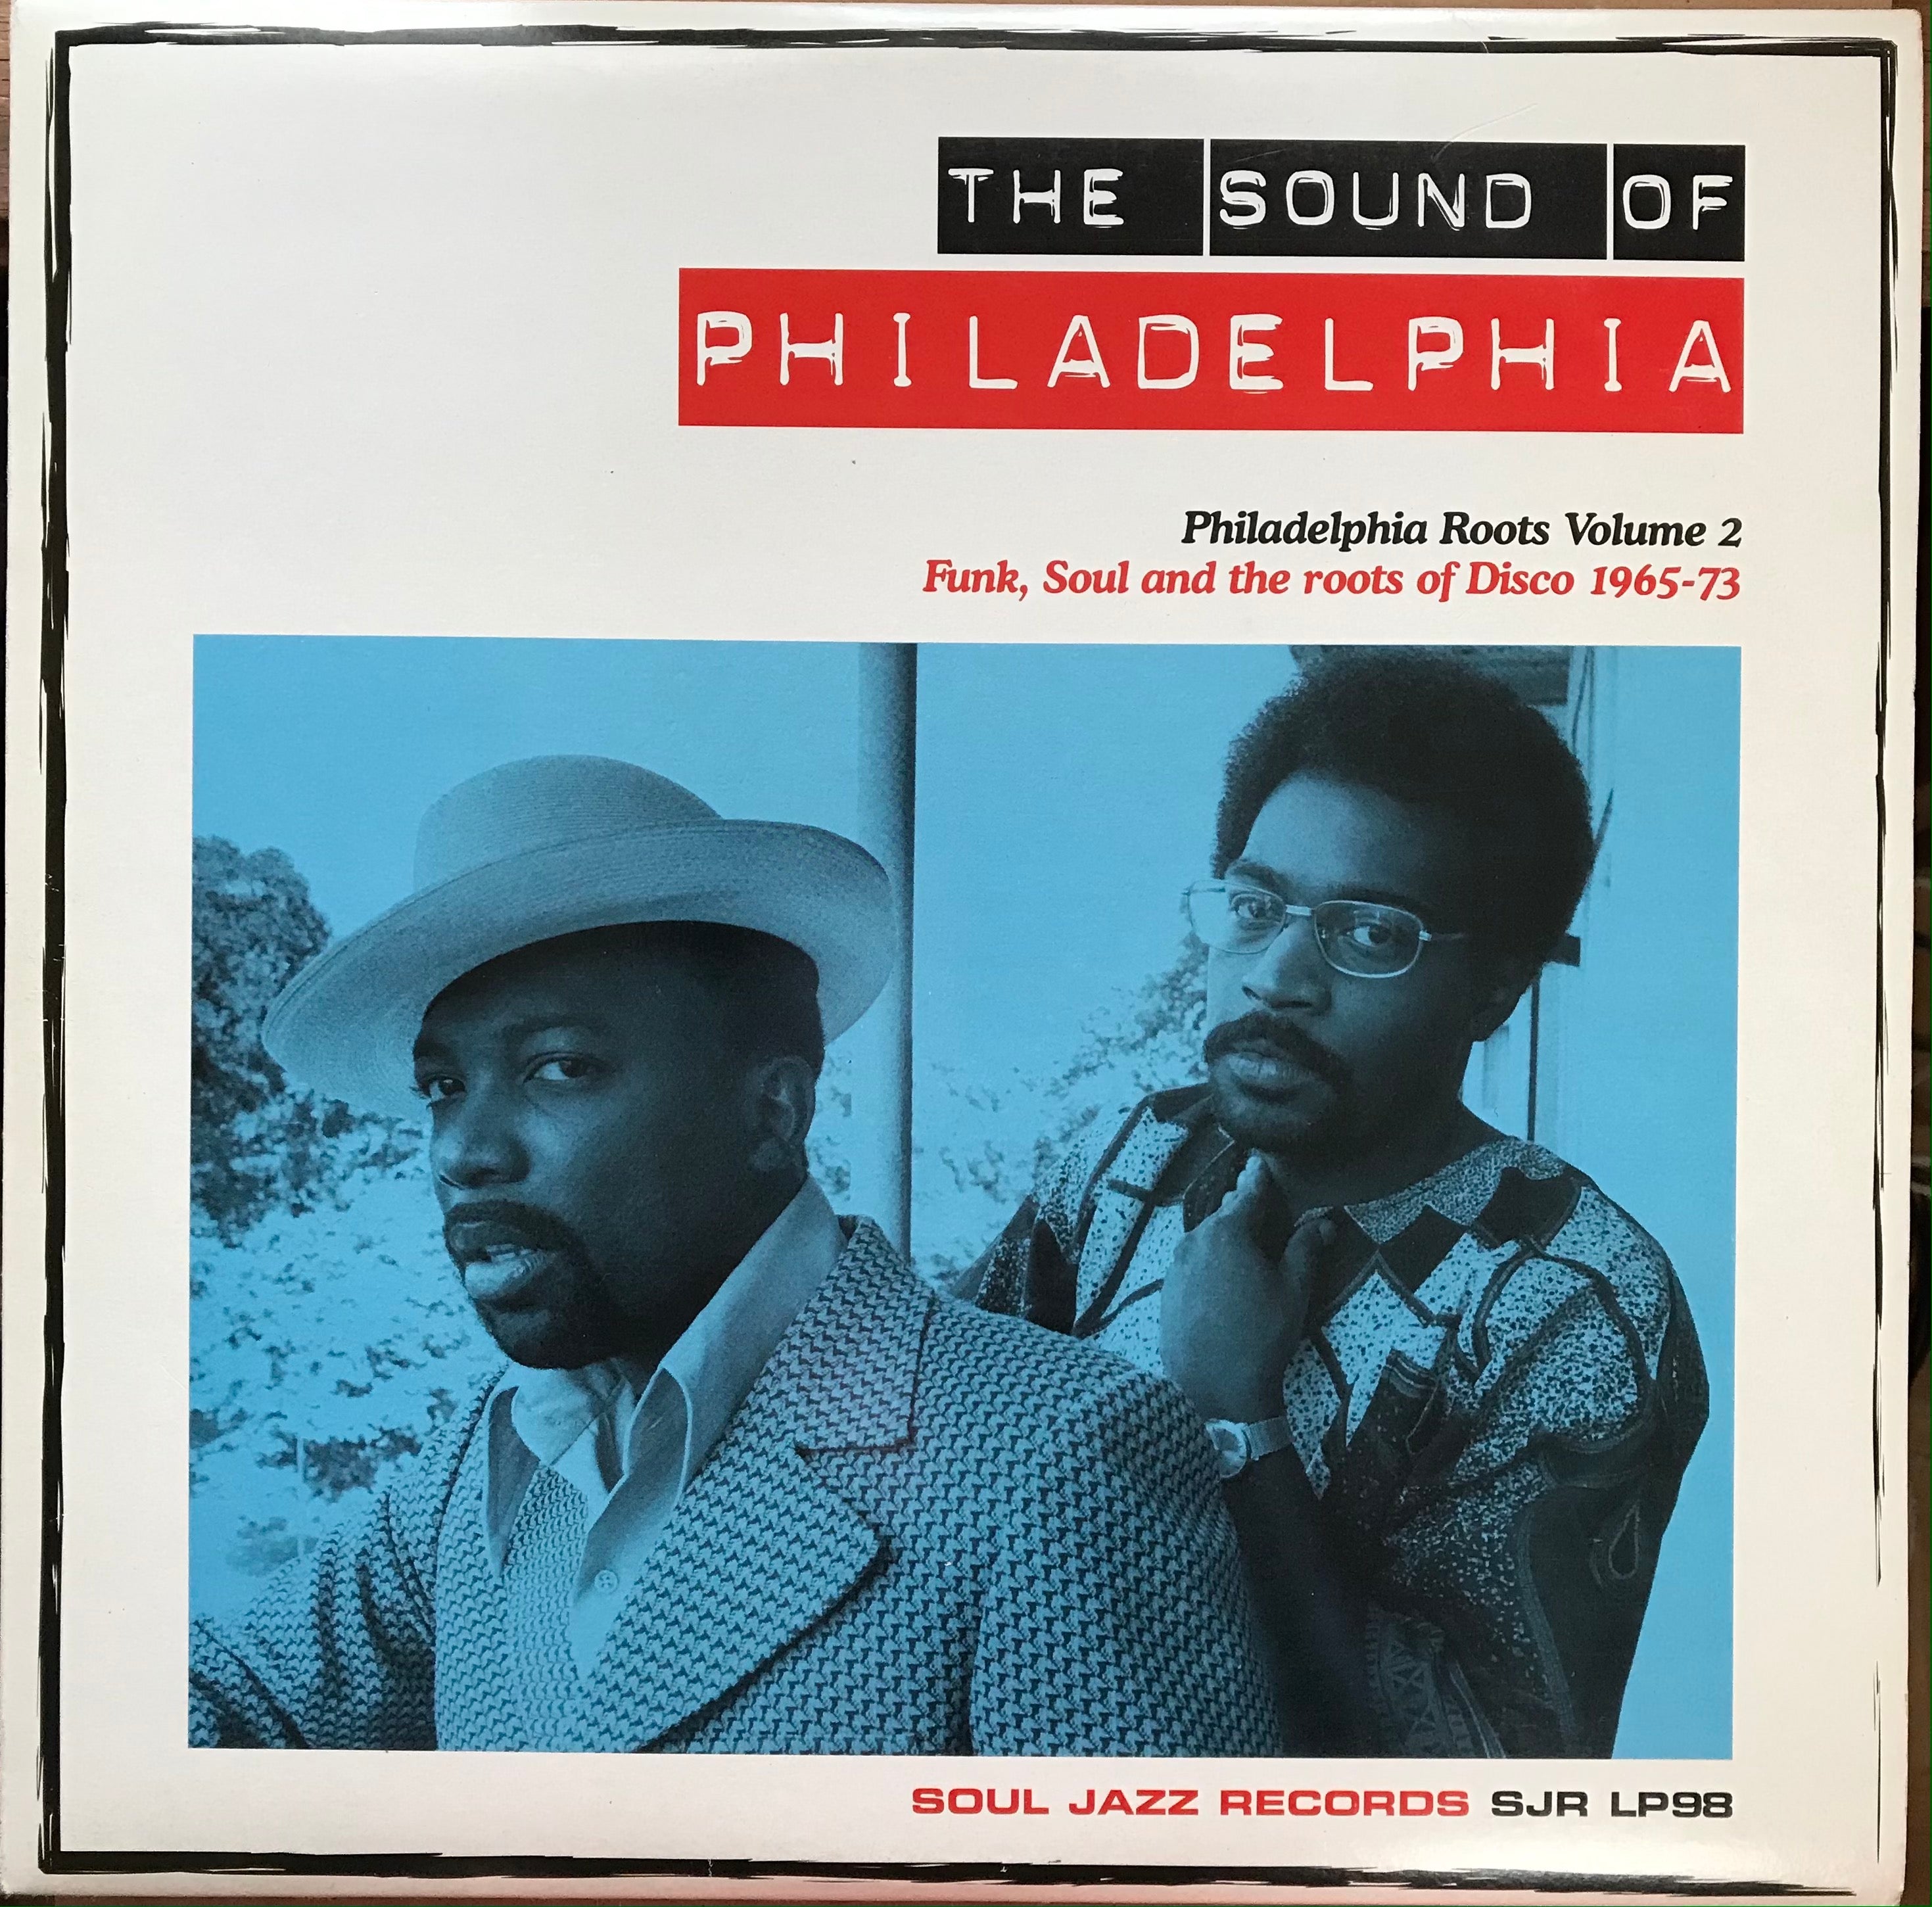 The Sound Of Philadelphia (Philadelphia Roots Volume 2 Funk, Soul And The  Roots Of Disco 1965-73)